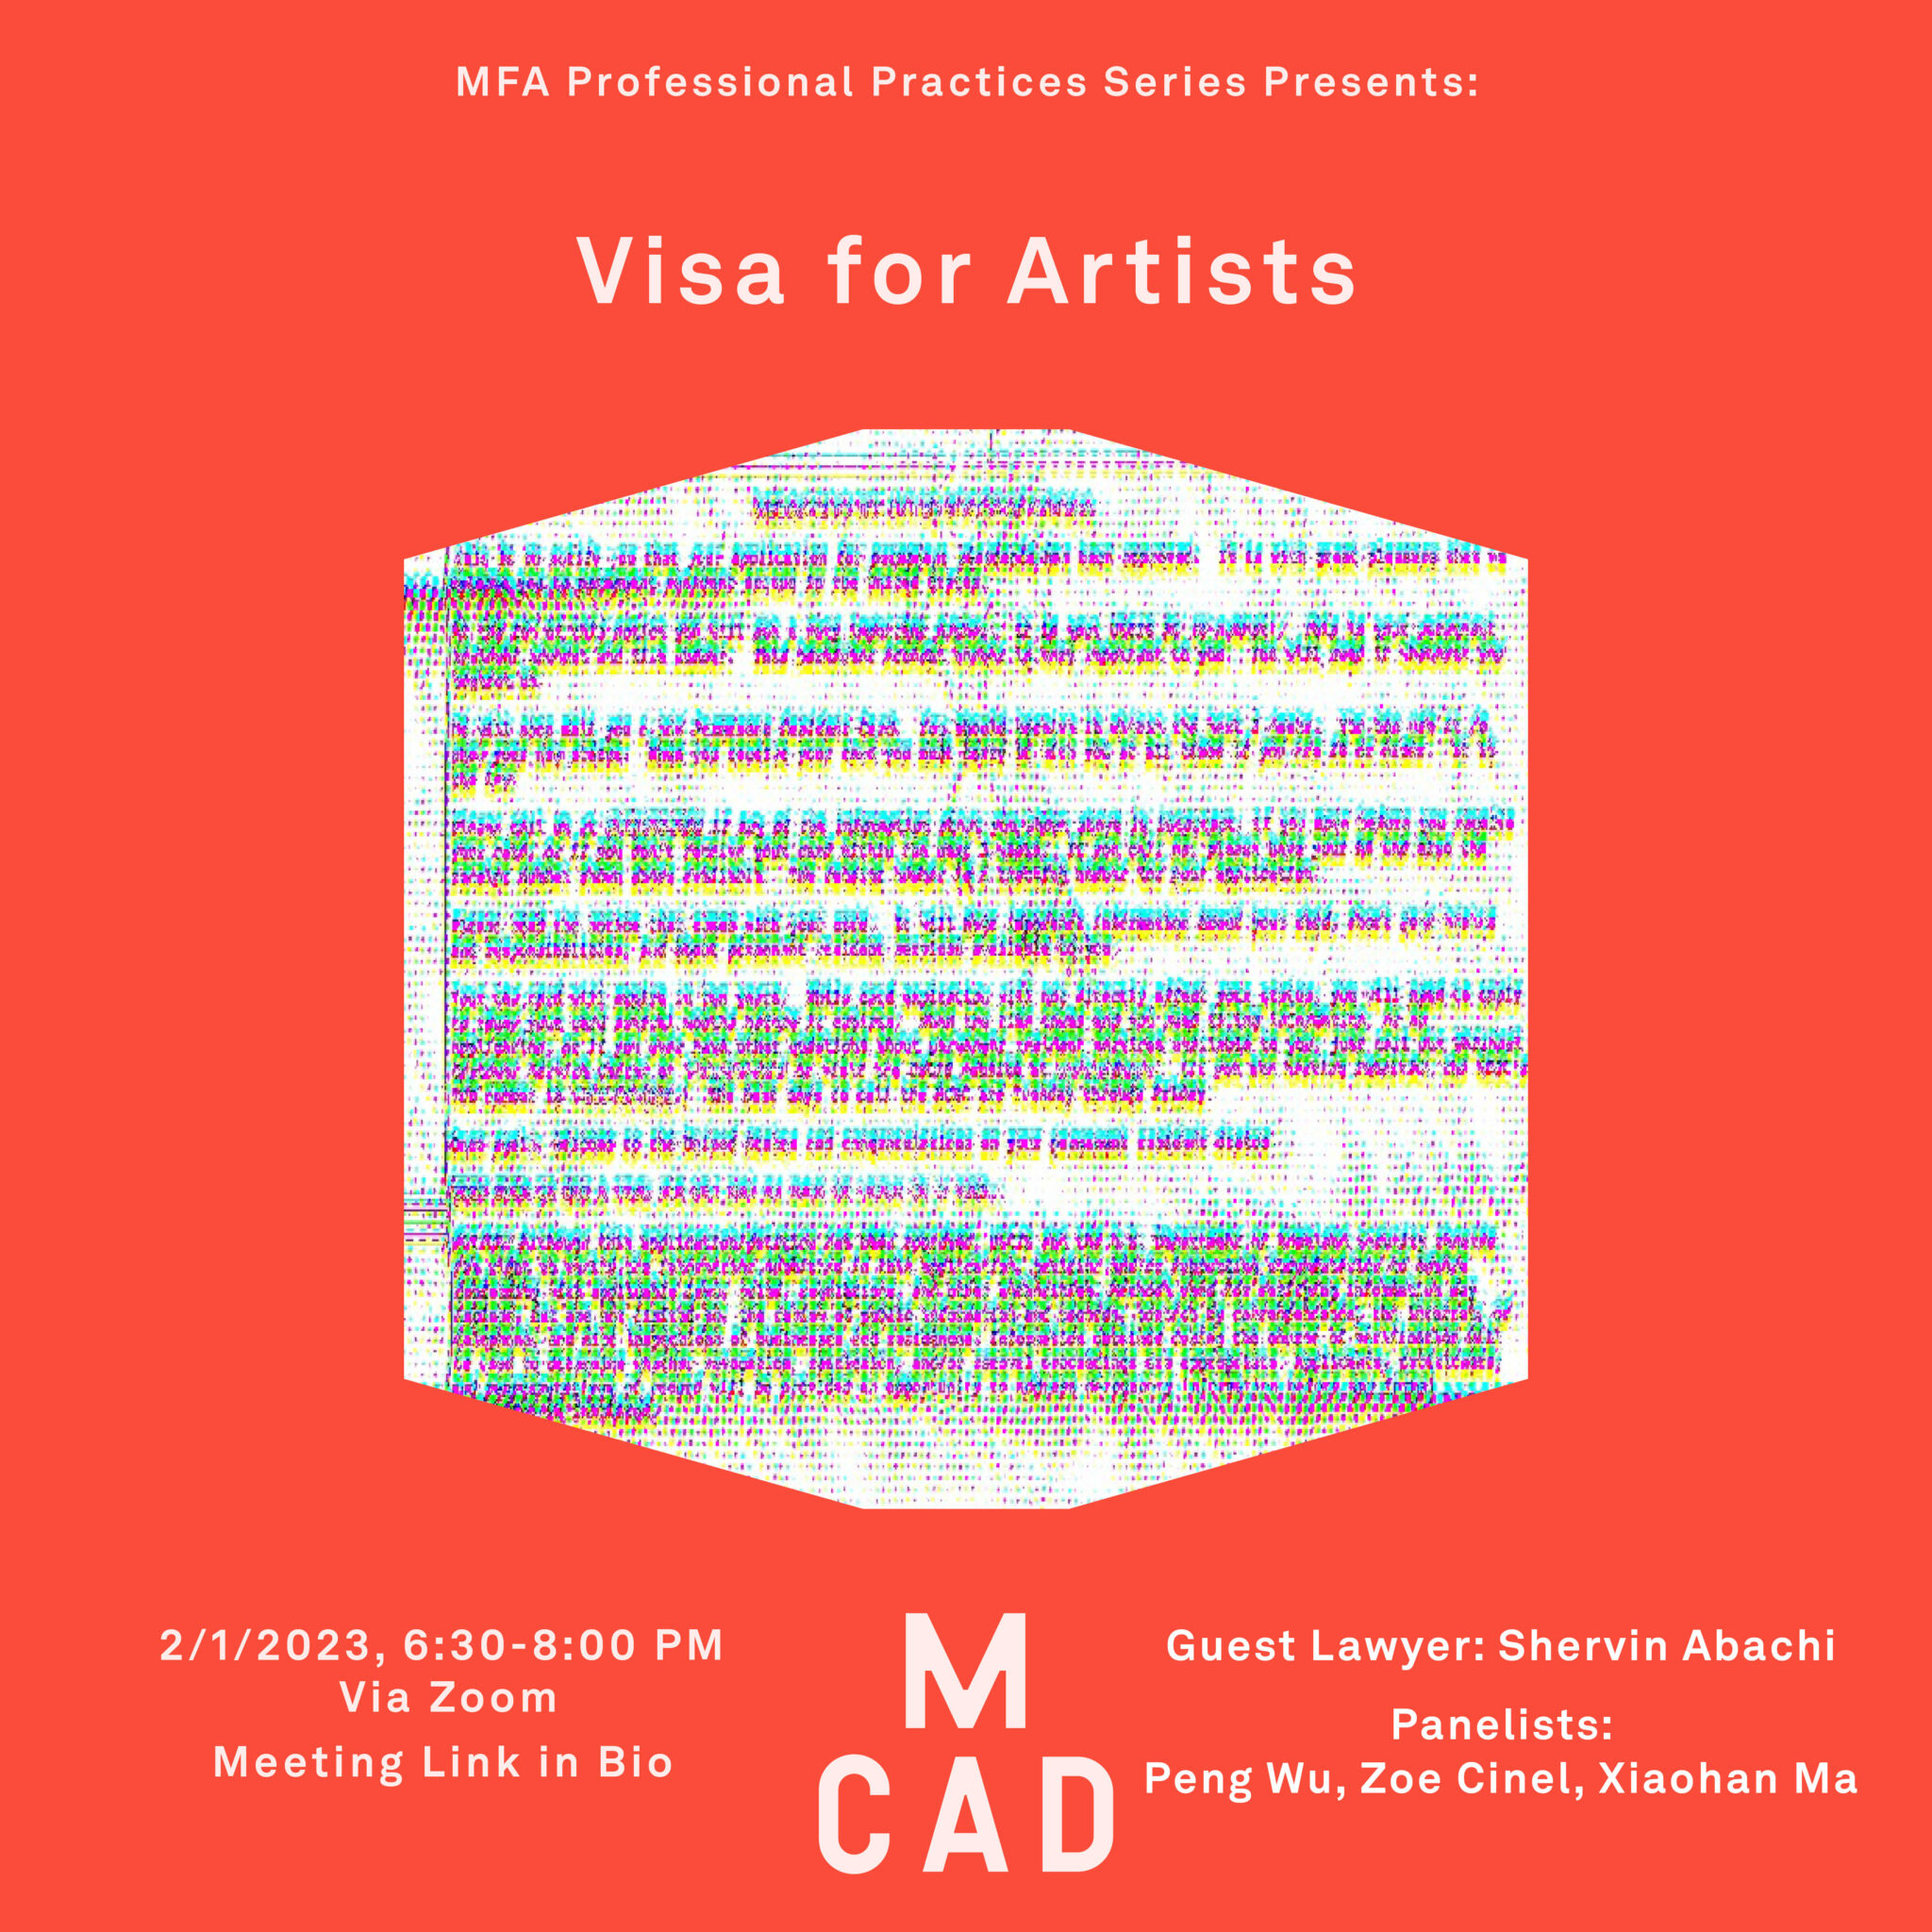 Visas for Artists: Important Things to Know